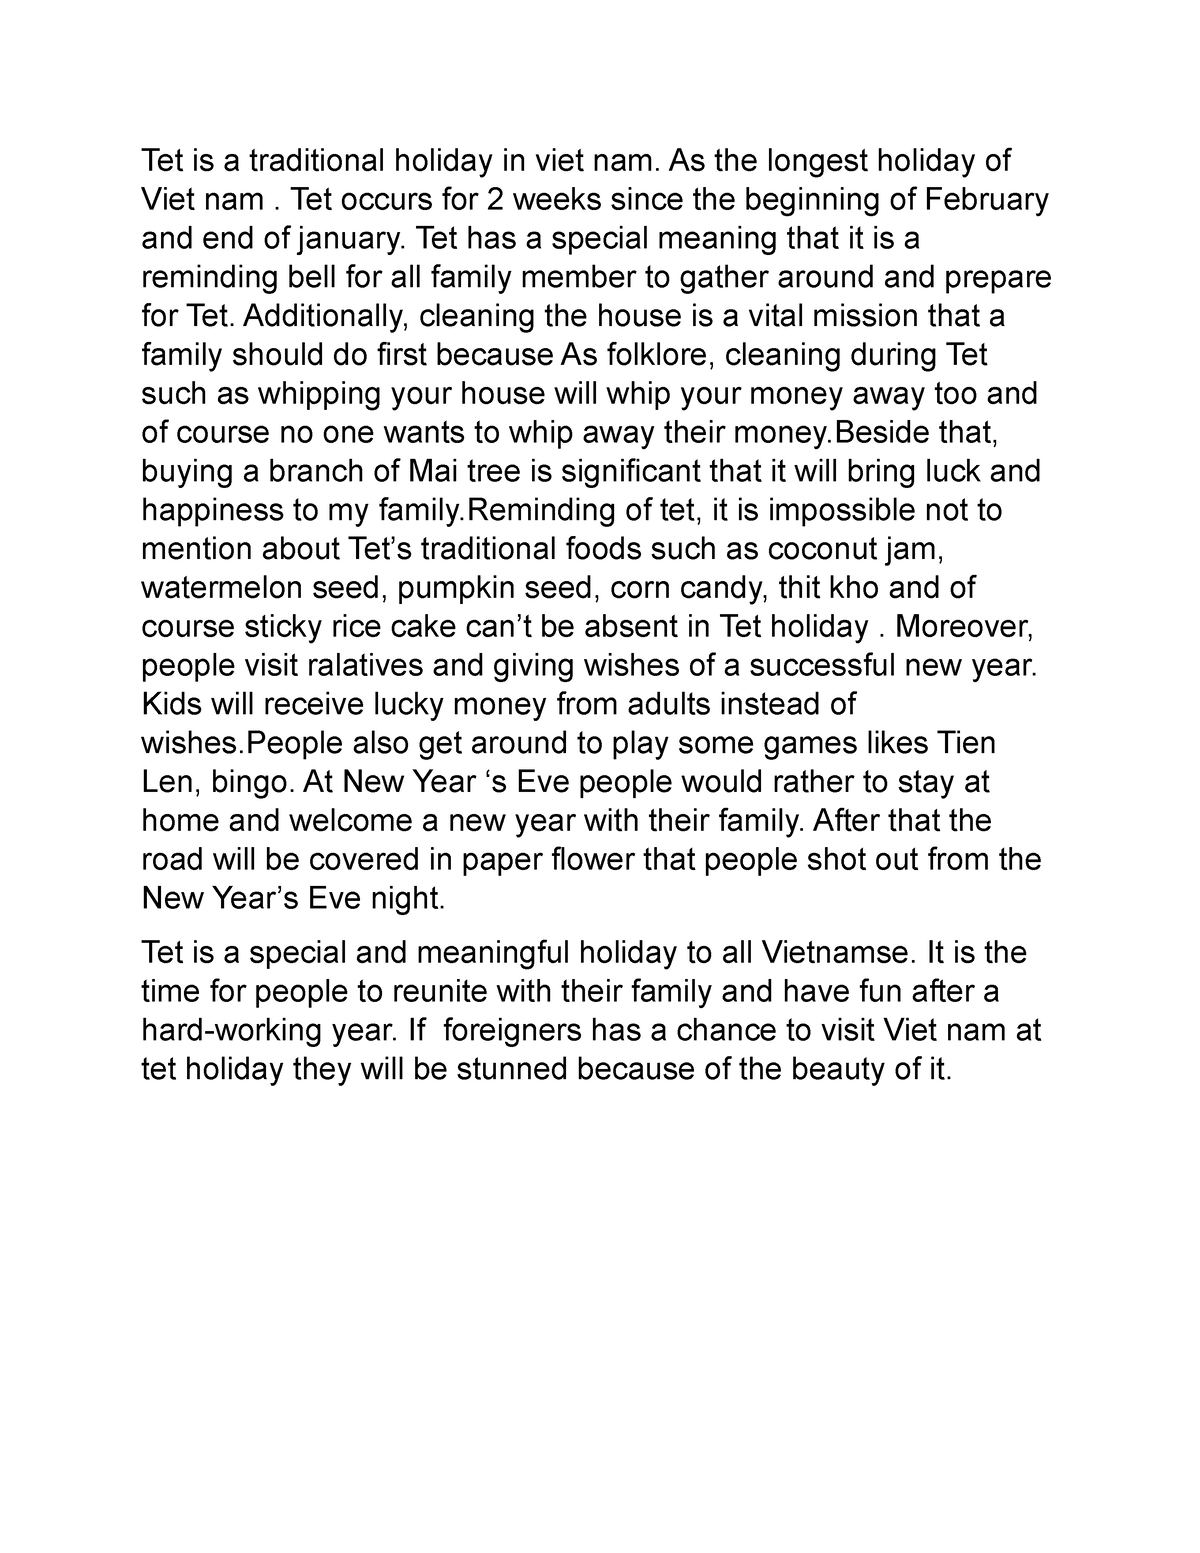 write an essay about tet holiday